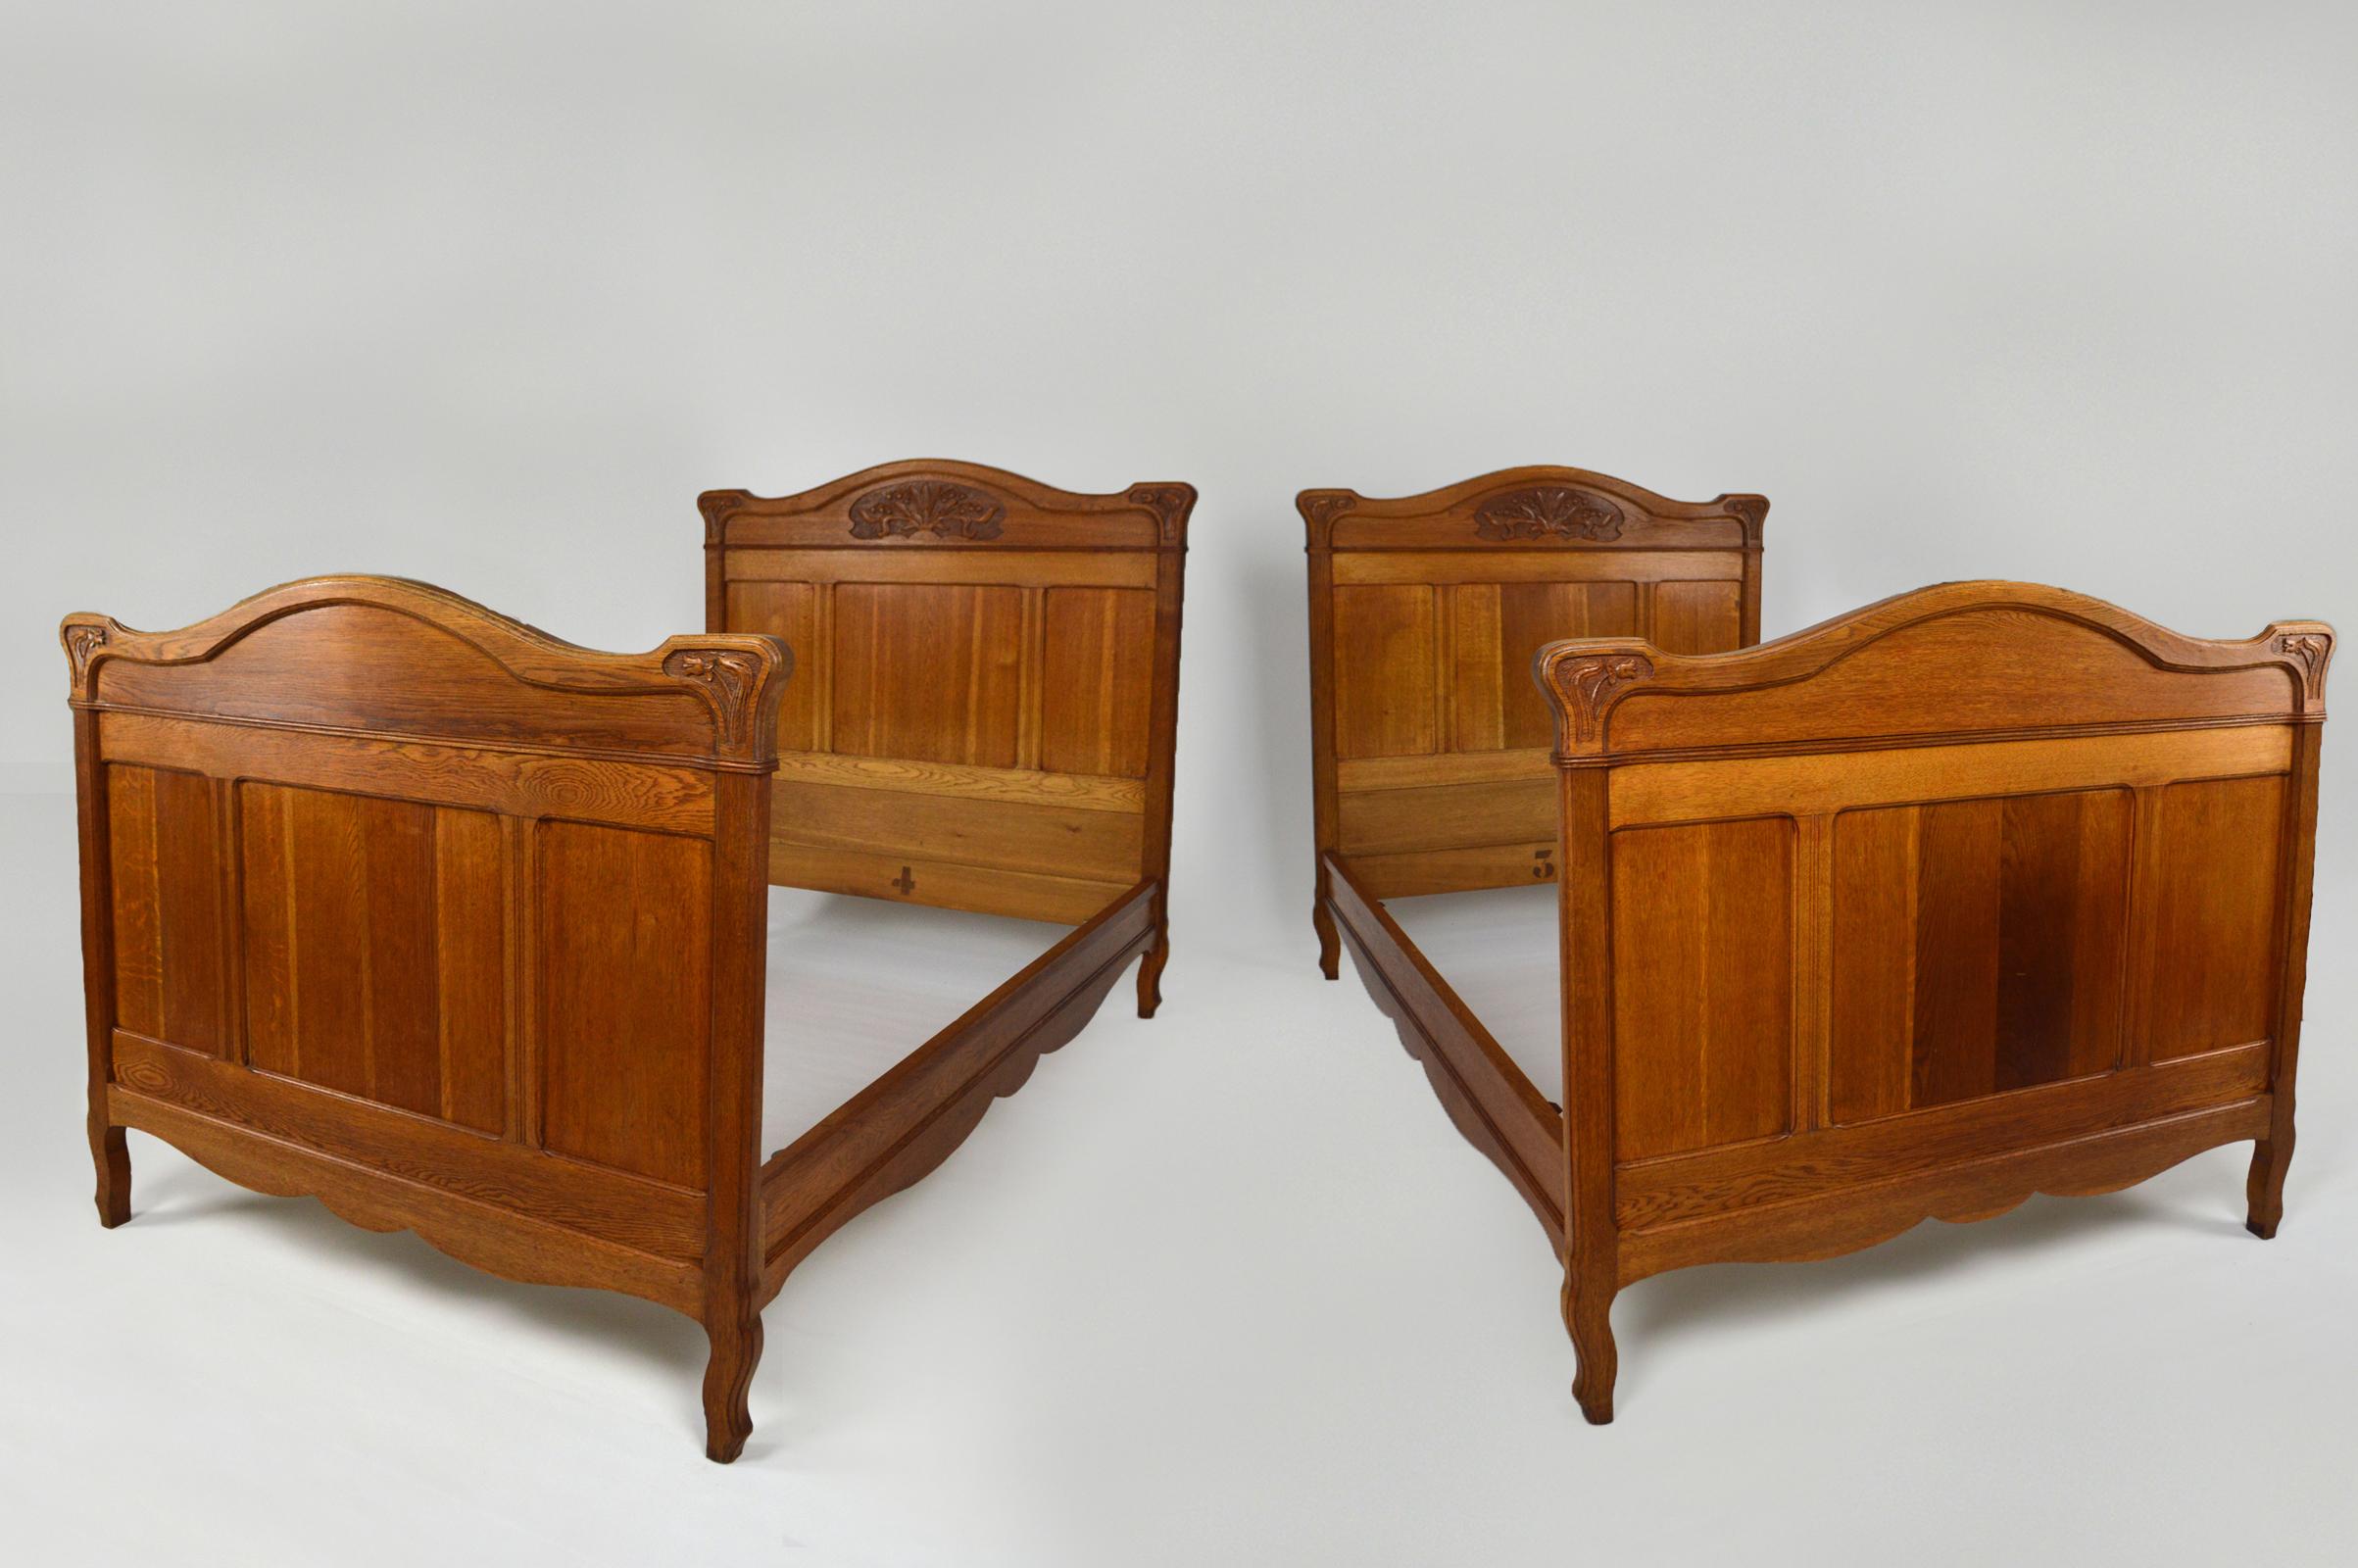 French Art Nouveau Twin Beds Bedroom Set of 3 in Solid Carved Oak, circa 1910 For Sale 7